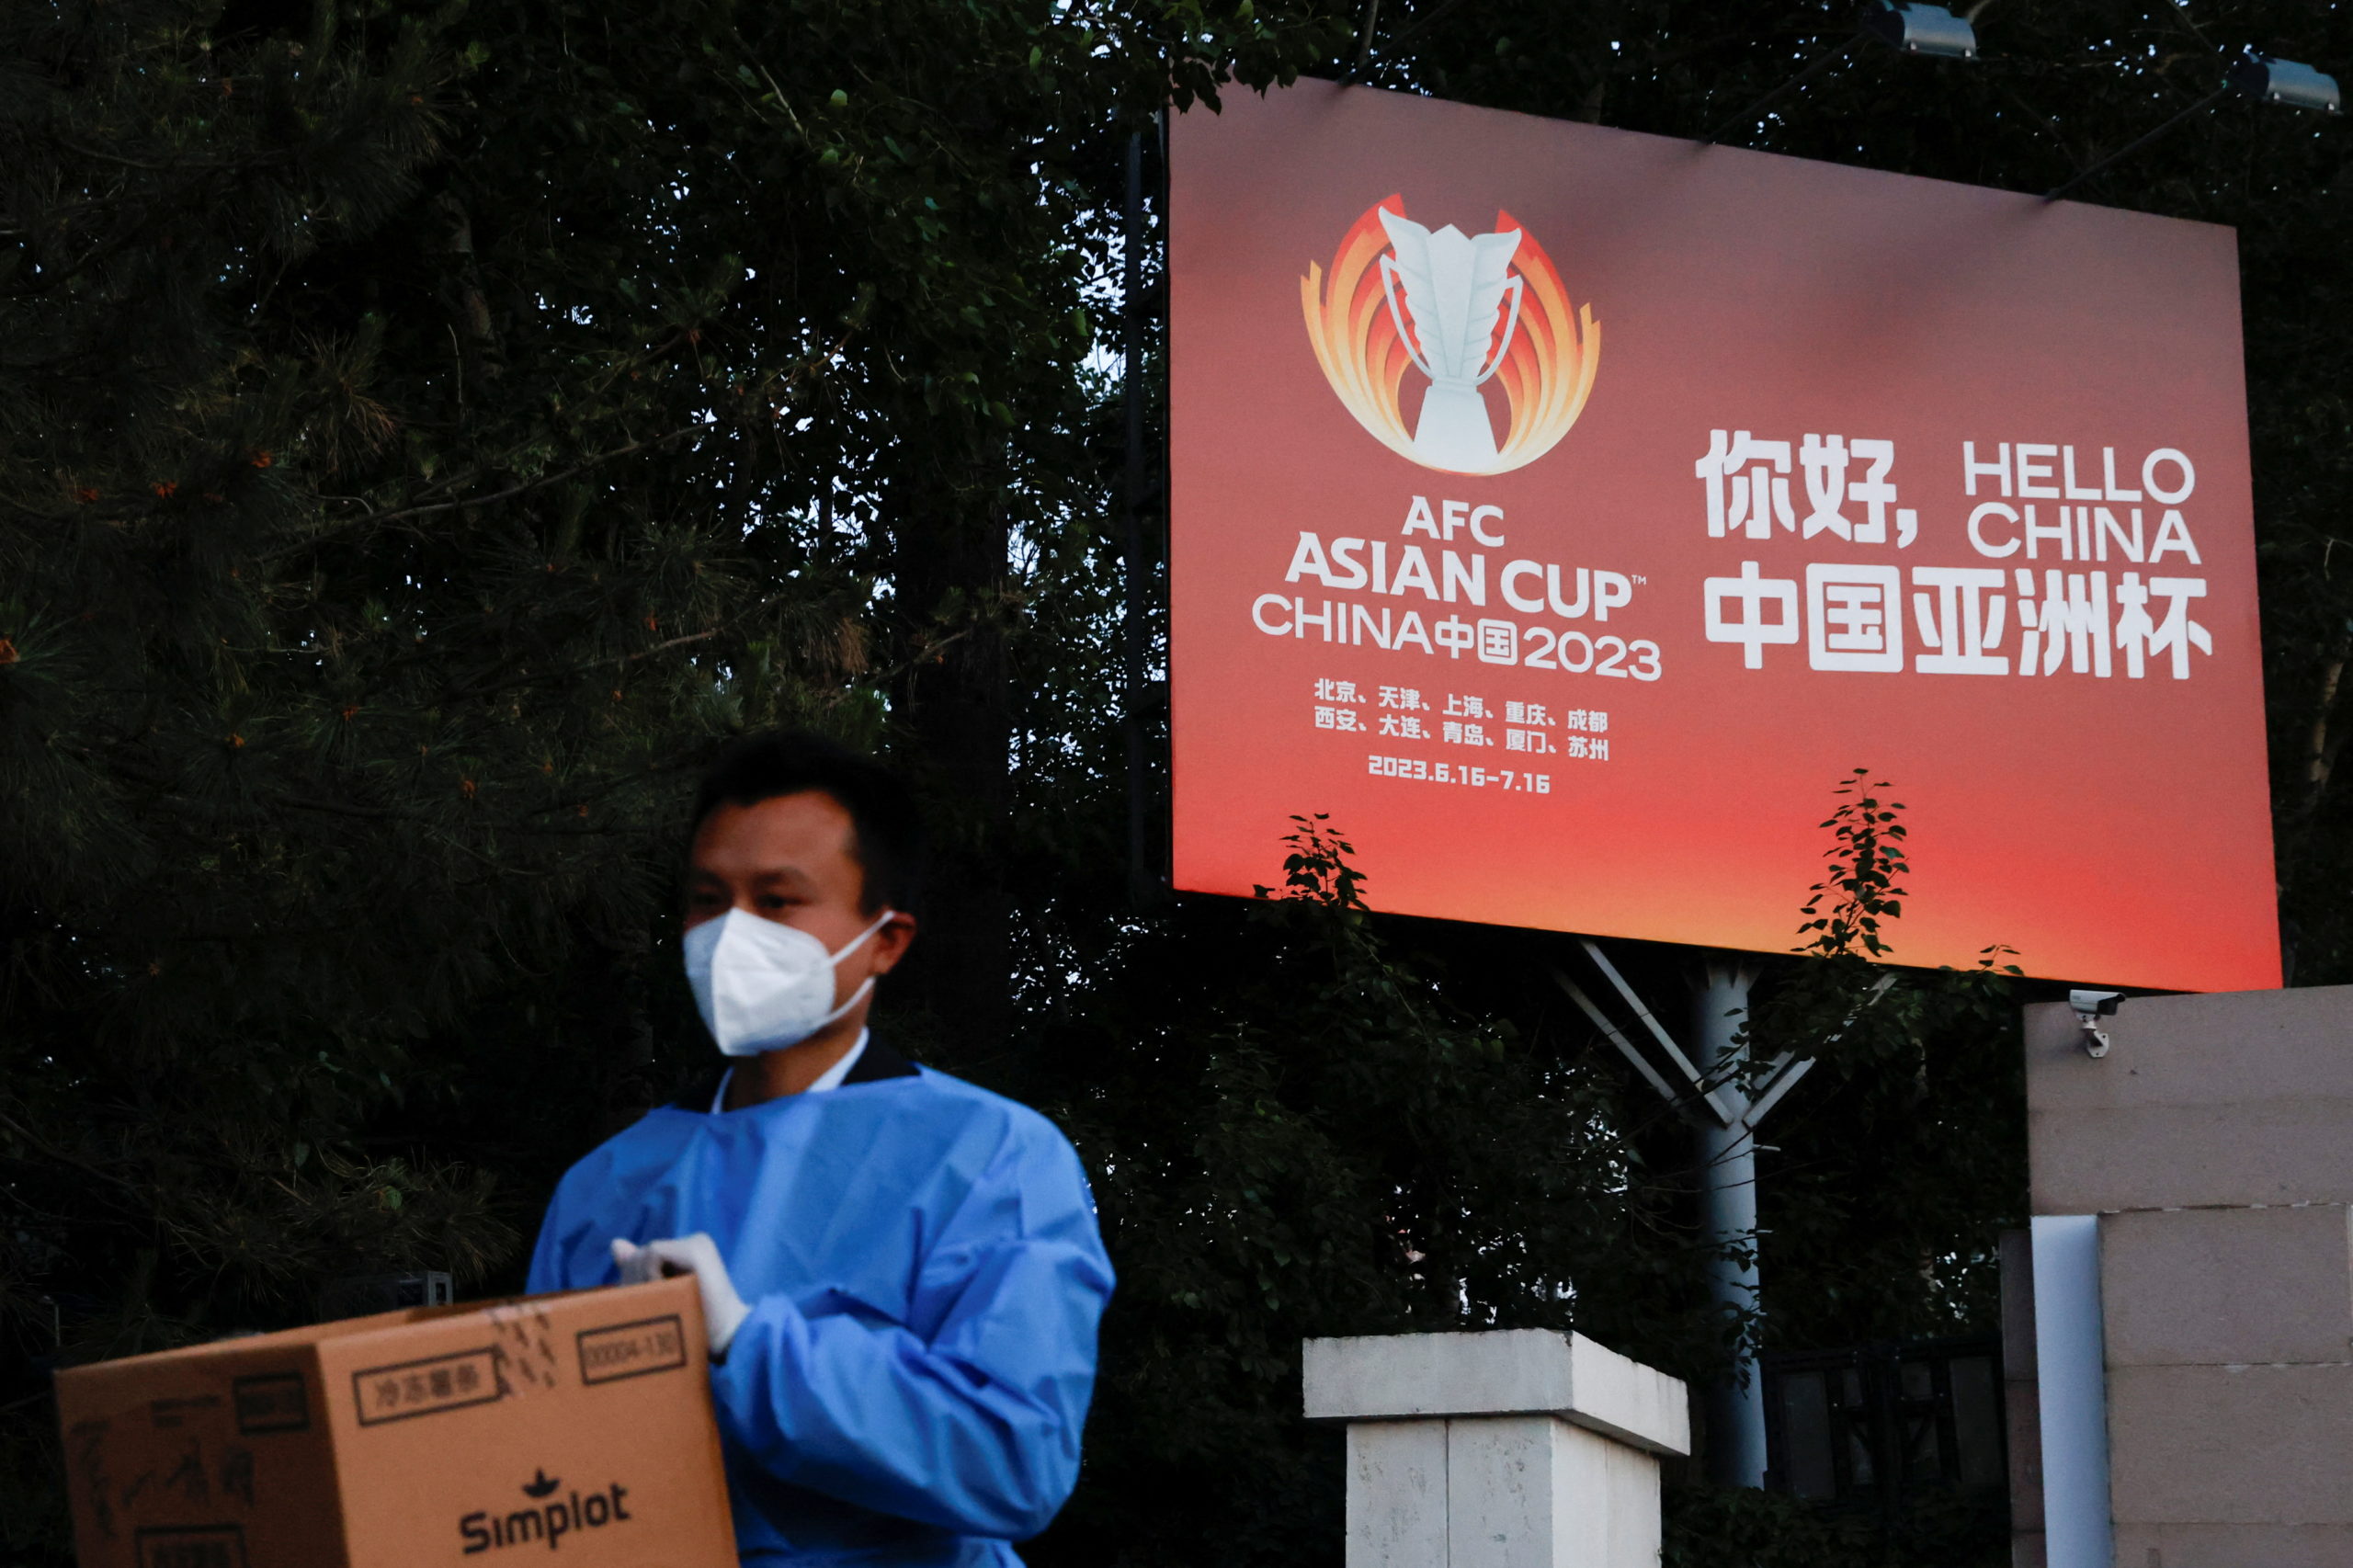 FILE PHOTO: A man wearing personal protective equipment (PPE) walks past an AFC Asian Cup billboard, as he steps out of a makeshift nucleic acid testing site amid the coronavirus outbreak ( COVID-19) broke out in Beijing, China May 14, 2022. REUTERS / Carlos Garcia Rawlins